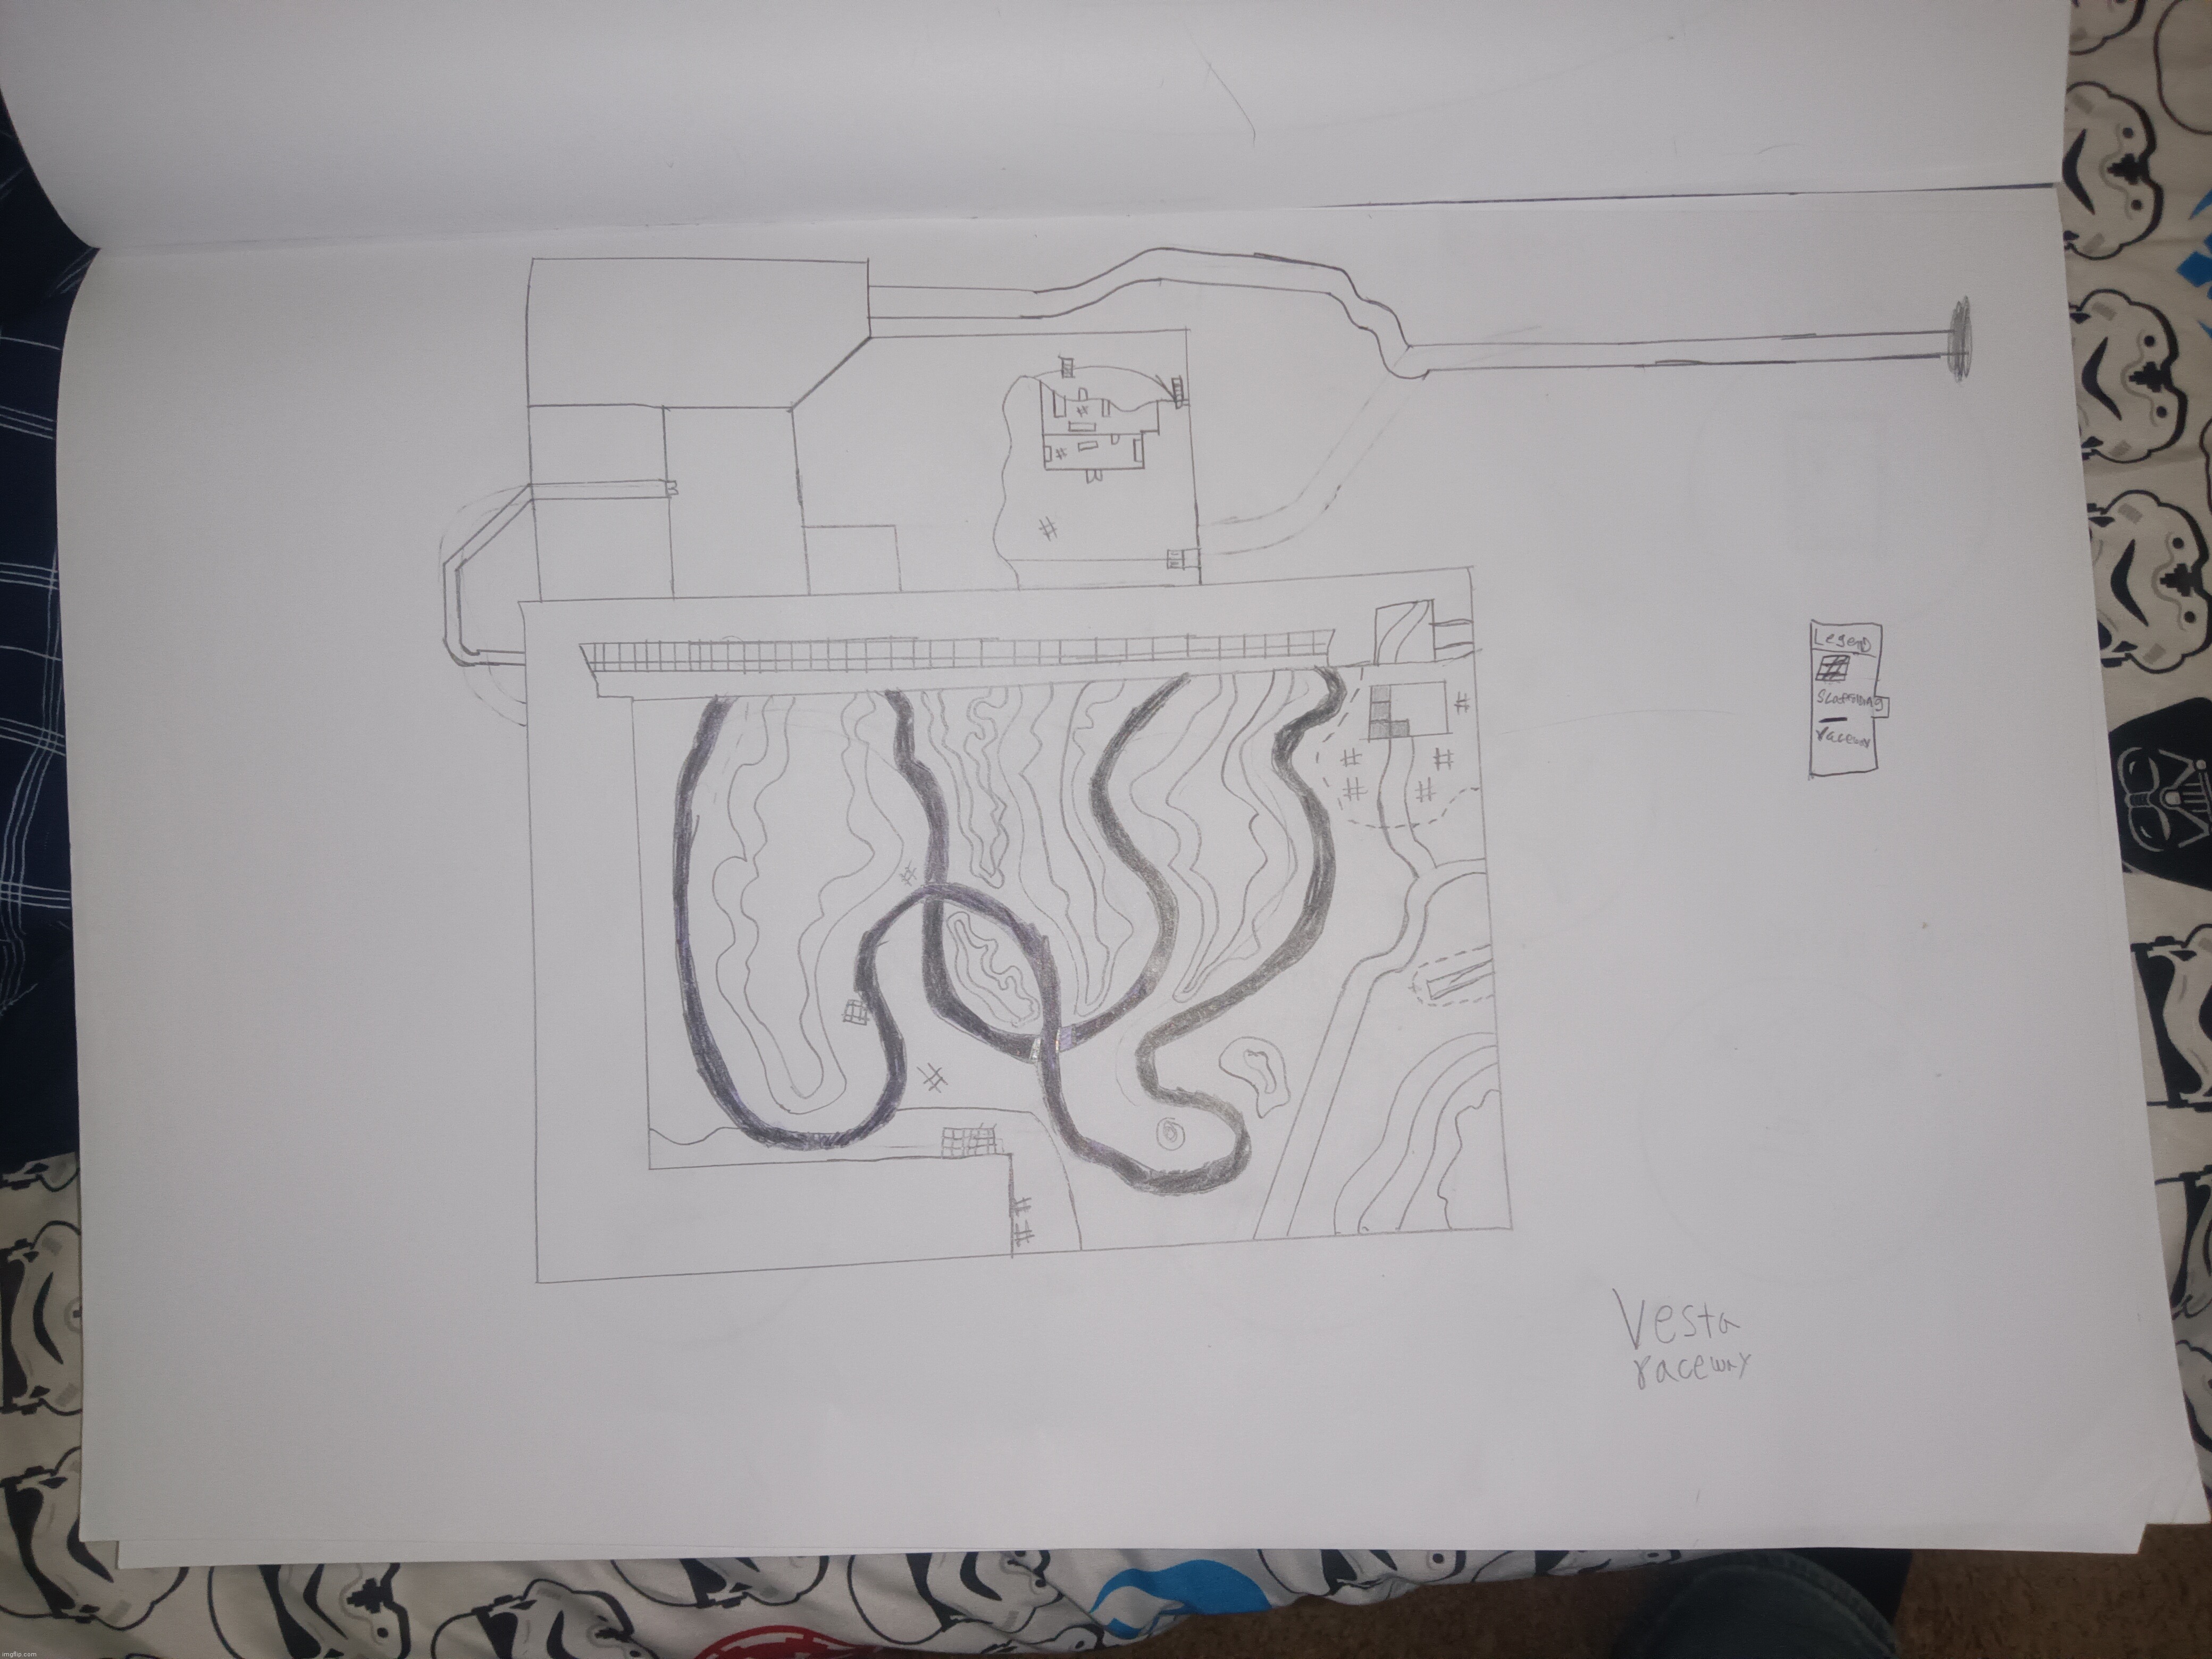 Vesta raceway! My favorite drawn location for the geodome | image tagged in drawings,spend the night,smg4,murder drones | made w/ Imgflip meme maker